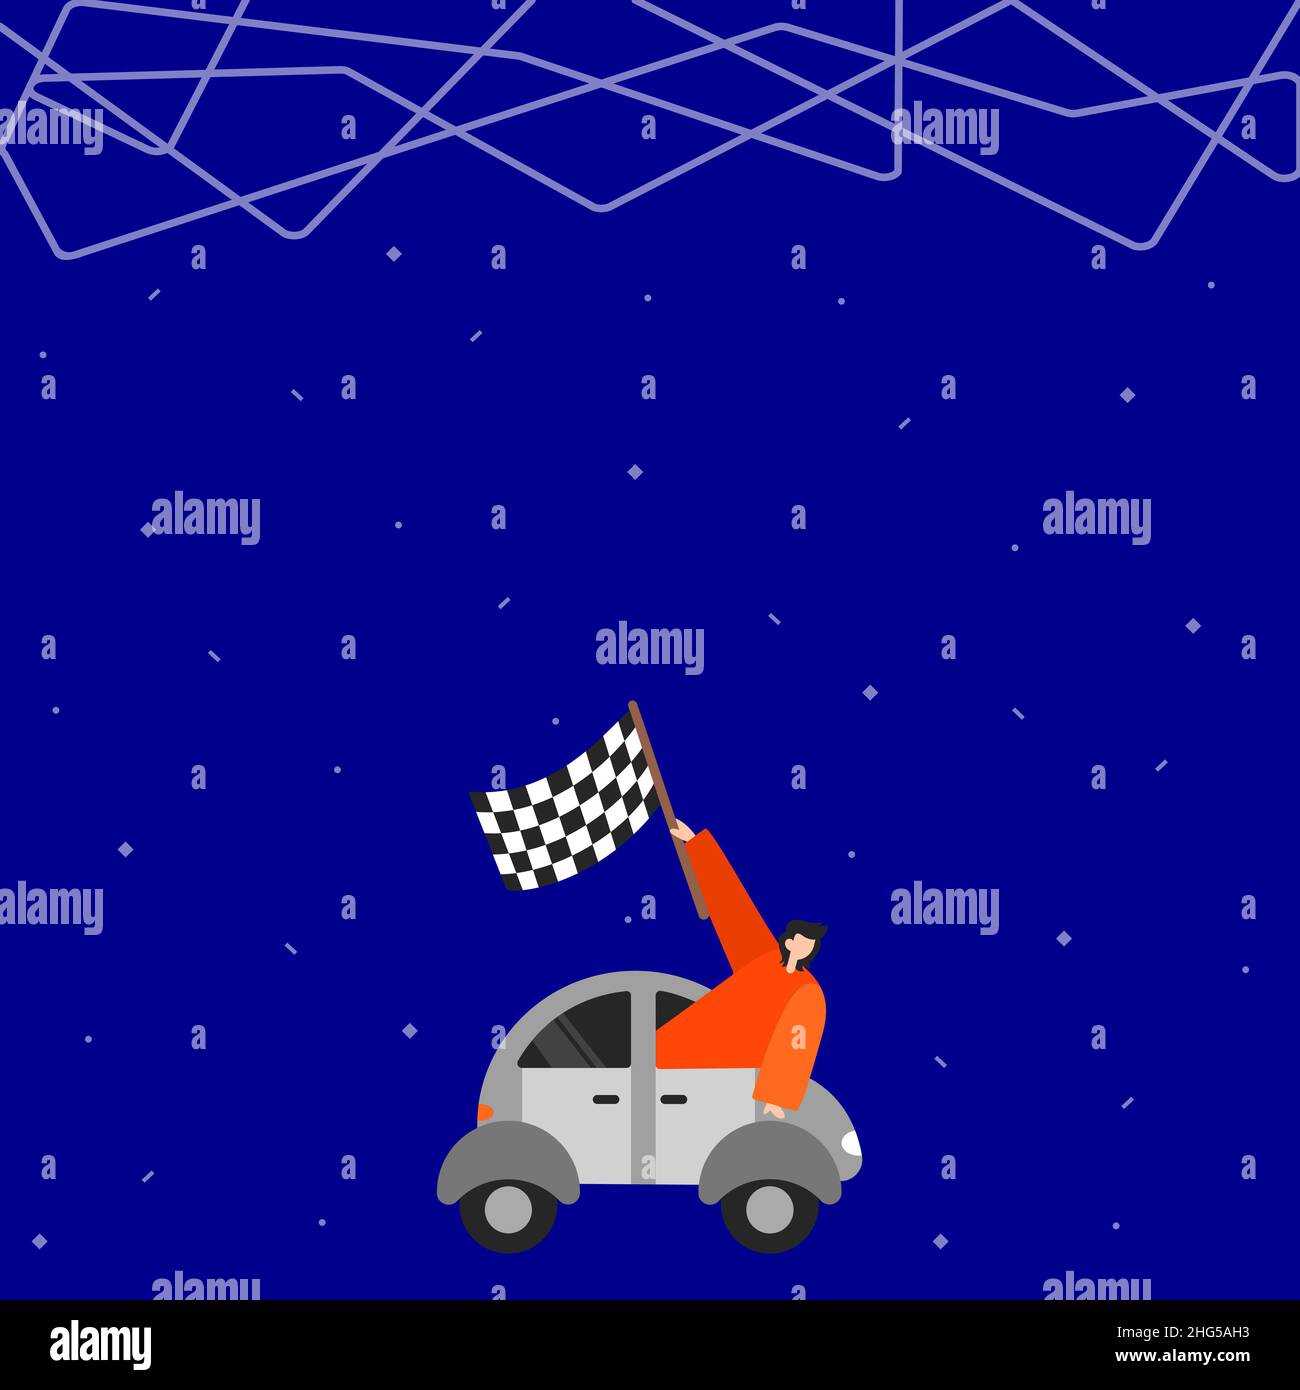 Businessman Waving Banner From Vehicle Racing Towards Successful Future Advancements. Human Reaching Out Car Using Flag Representing Start Newest Stock Vector